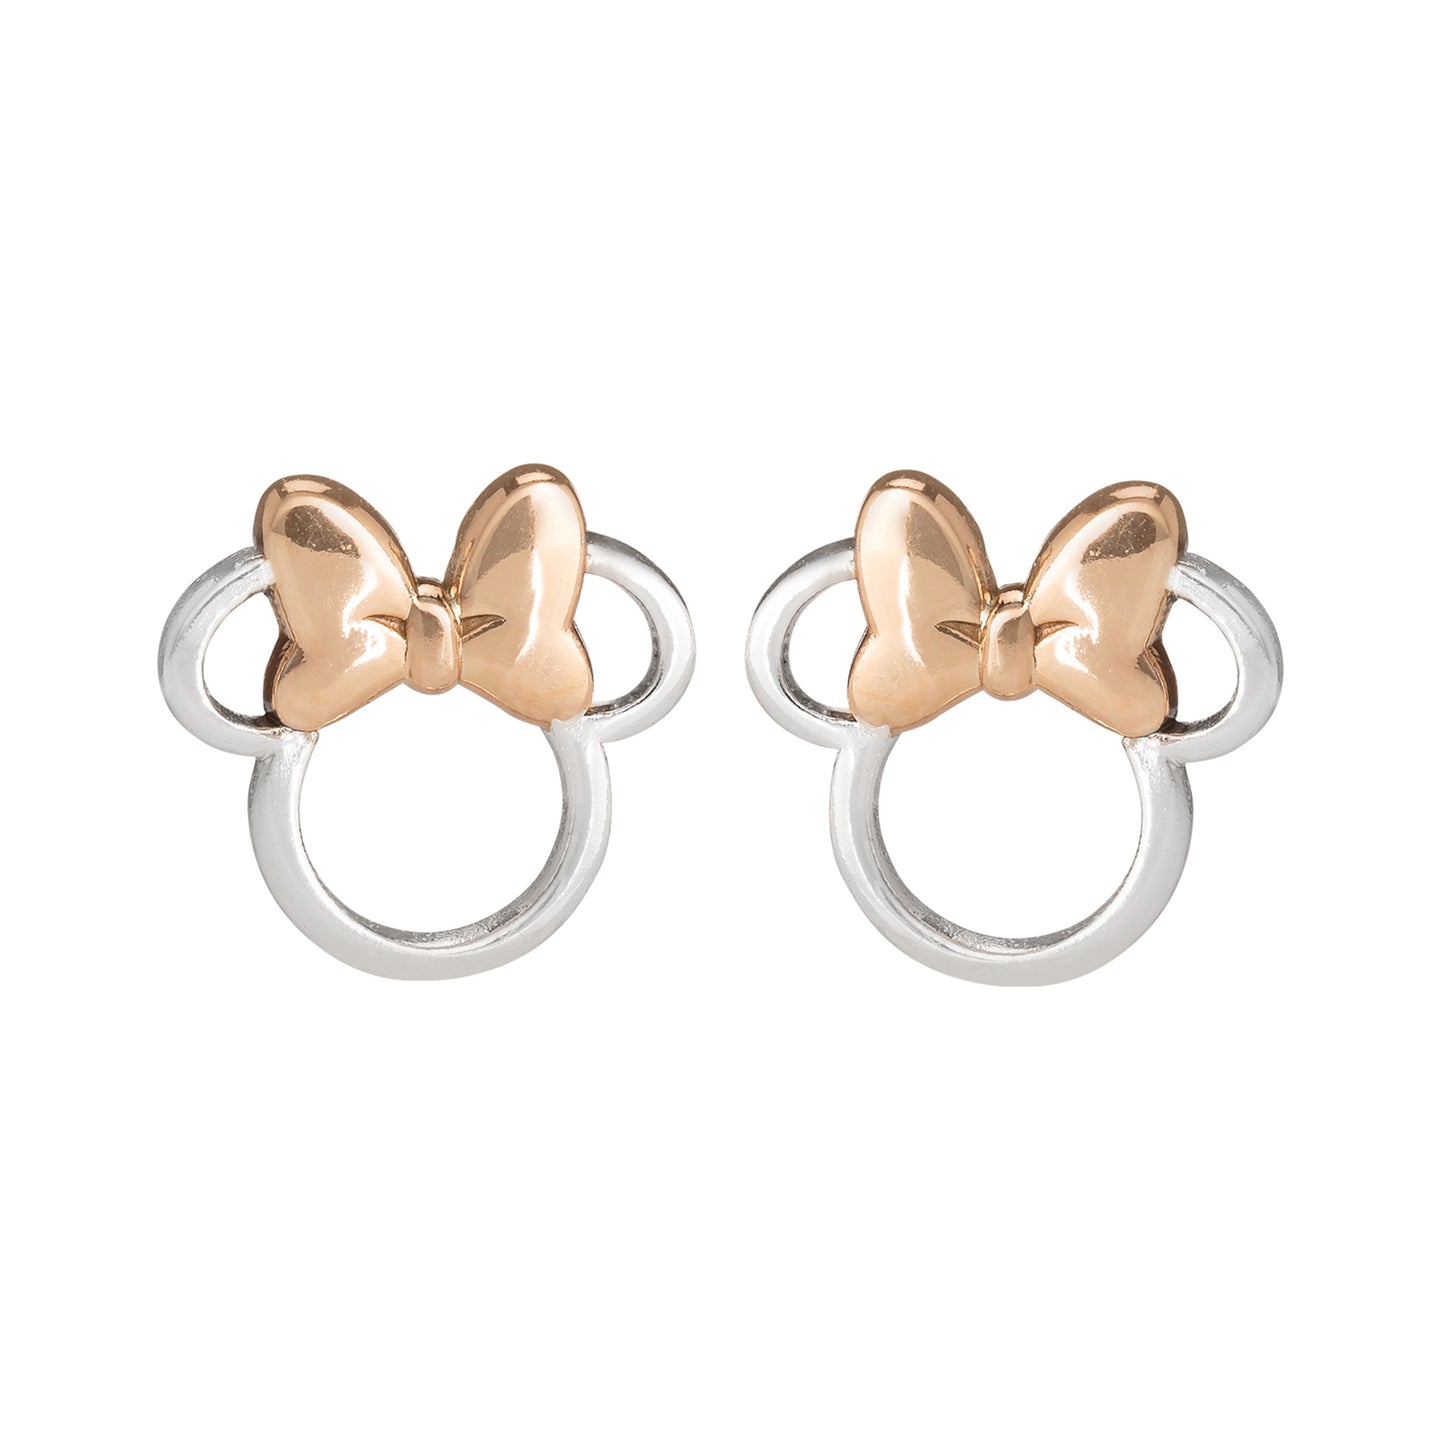 Disney Minnie Mouse silver and rose gold Sterling silver Stud Earrings